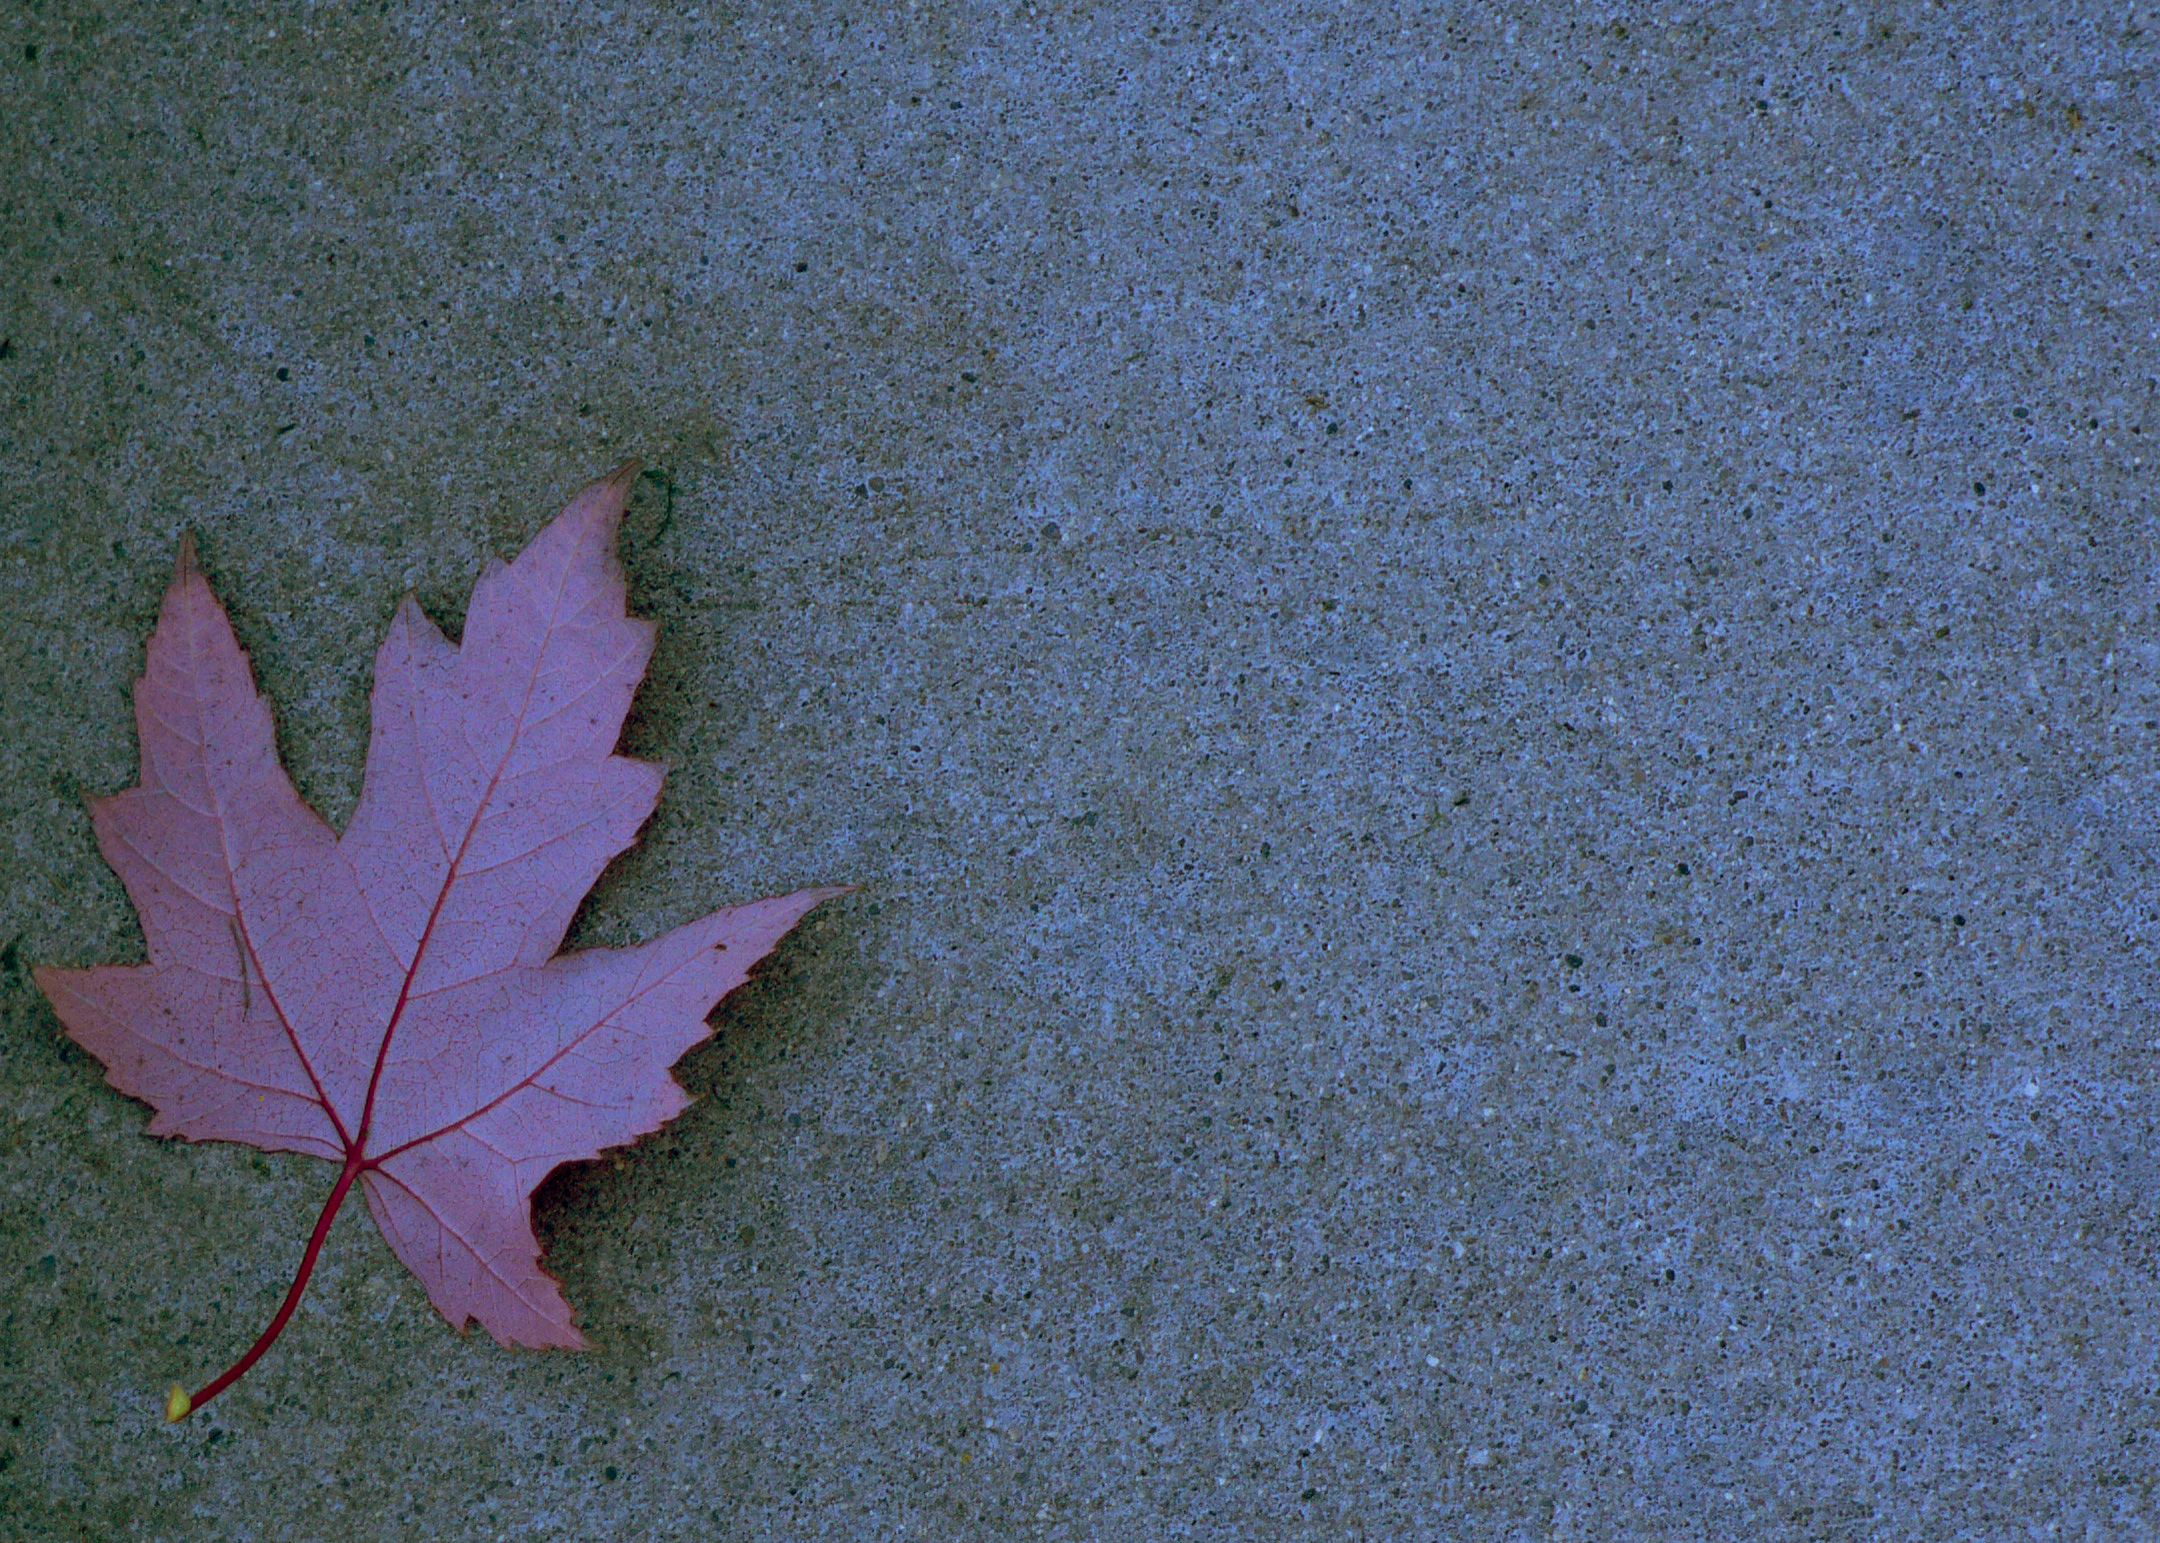 a single red leaf laying on the ground